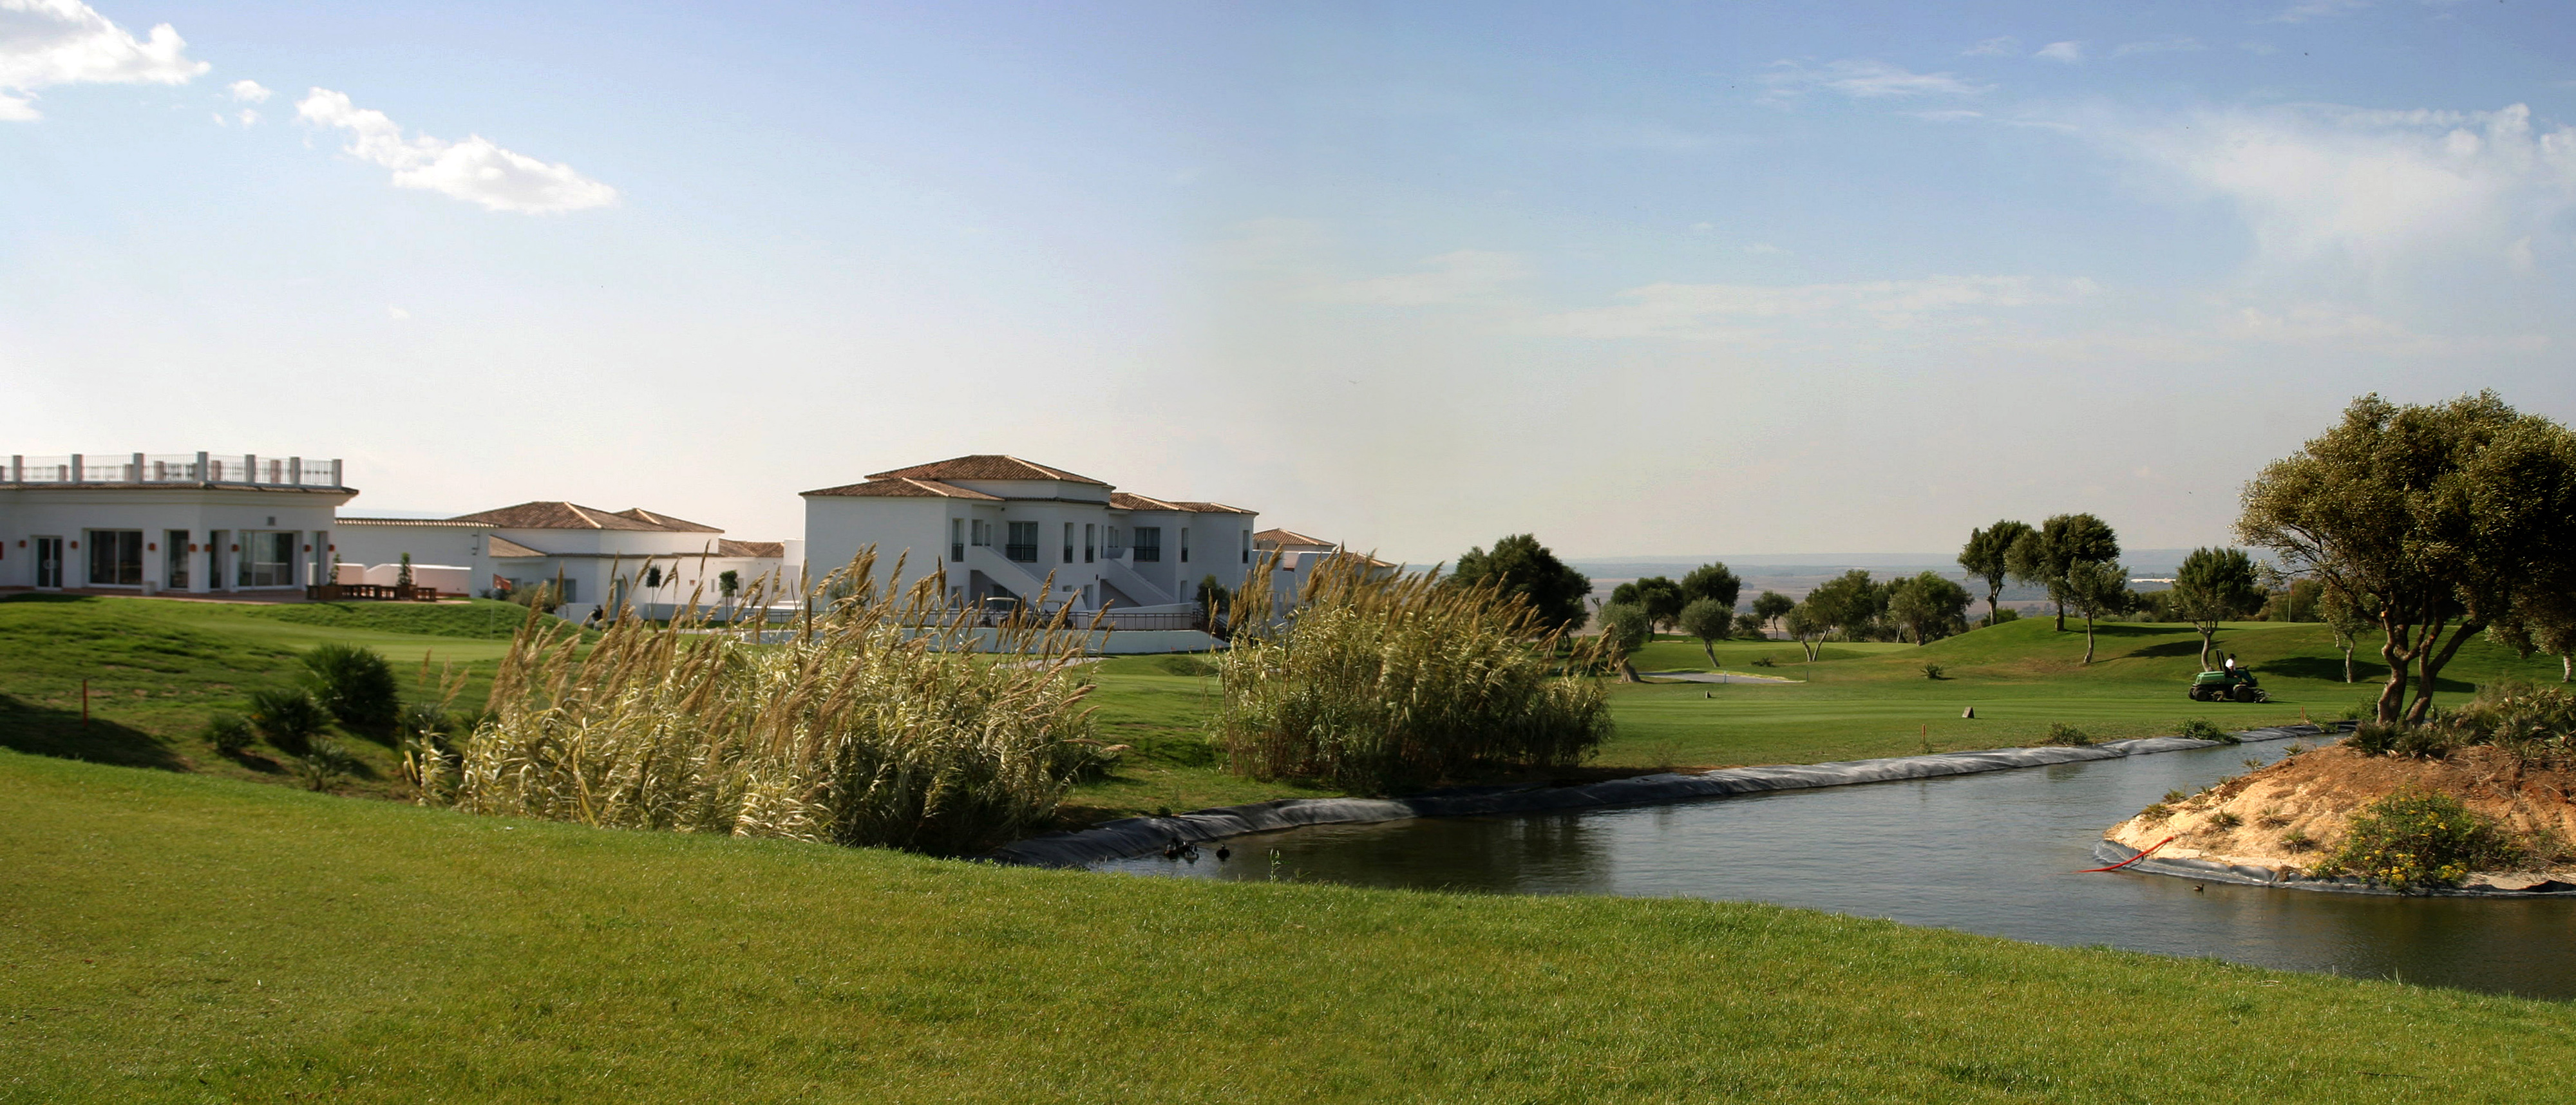 EXCLUSIVE! Check out this cracking golf package deal with Golf Escapes